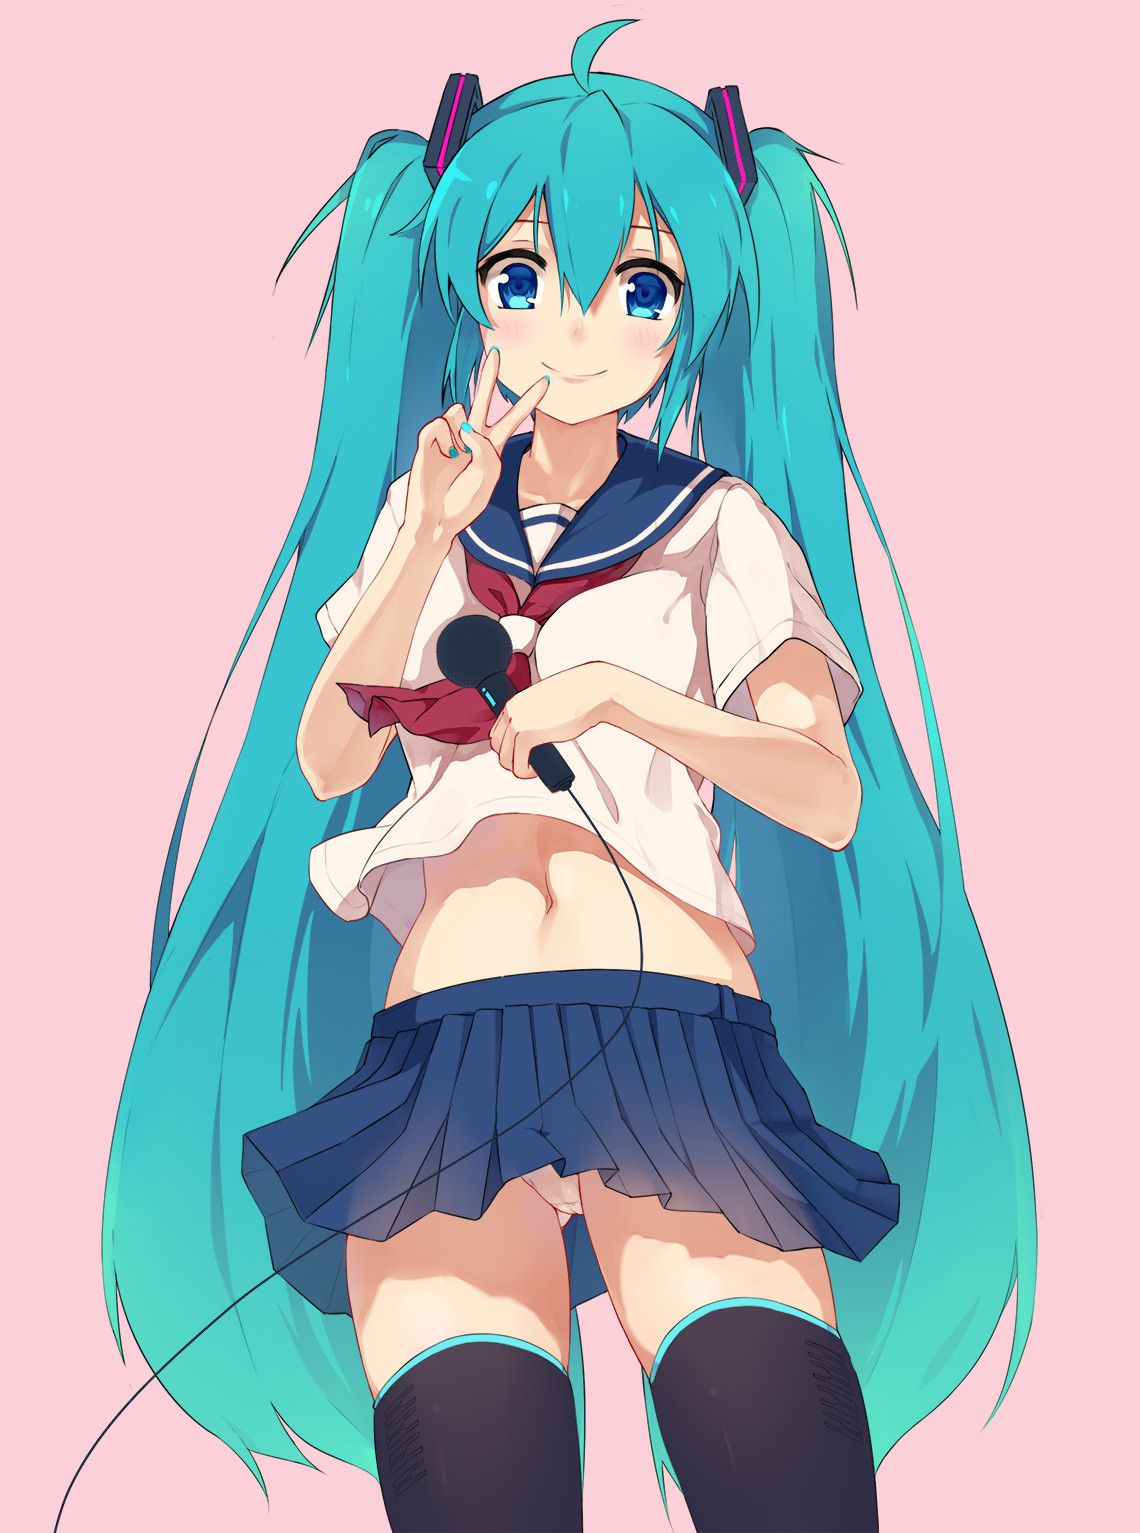 [Secondary] [VOCALOID] want to see images of miku dressed in school uniform! 3 7